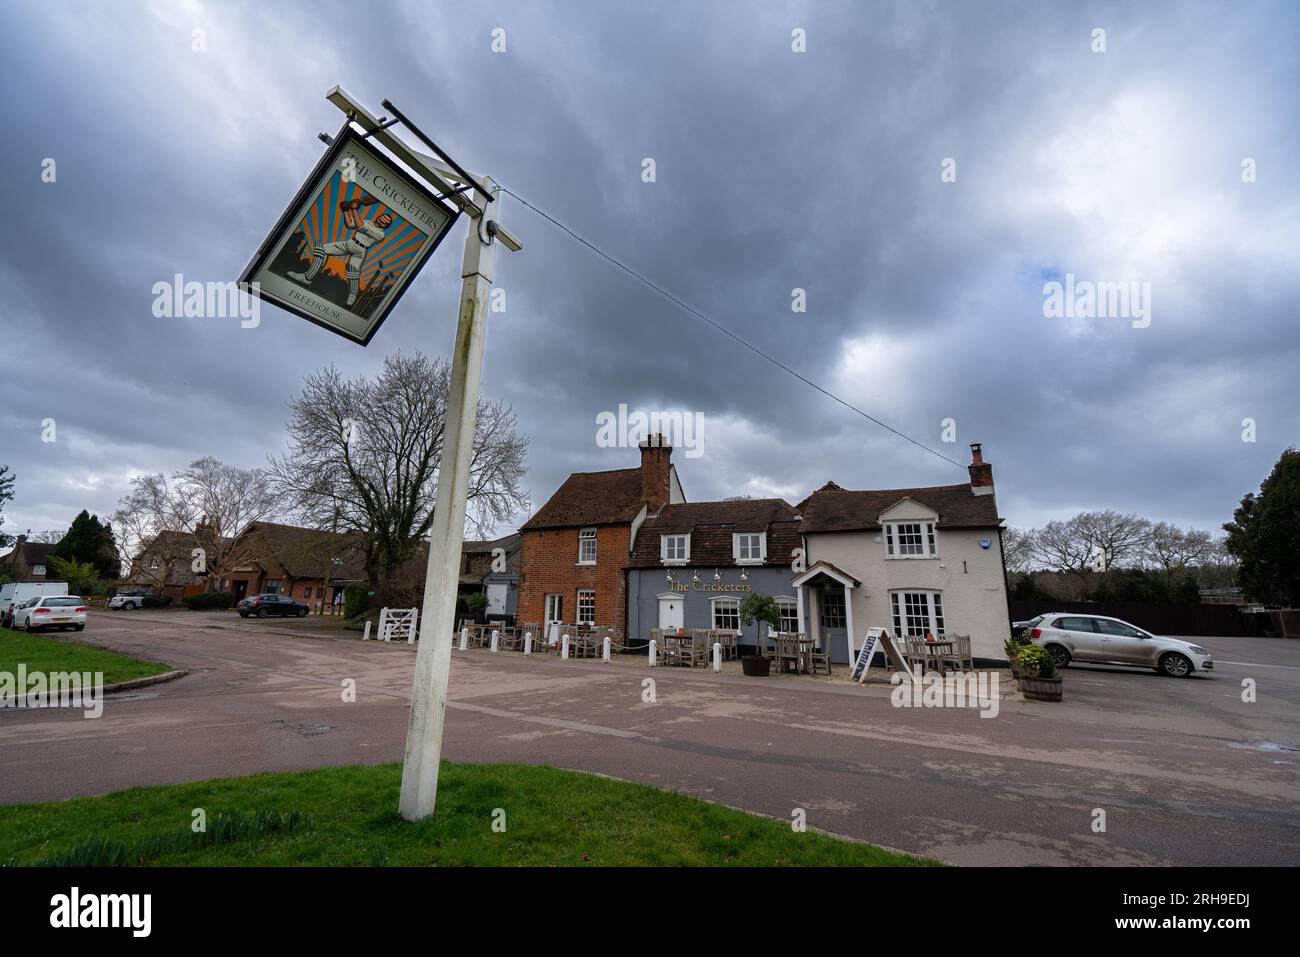 The Cricketers Pub in Sarratt, hertfordshire, UK on a blustery windy day dark moody sky sign swinging in wind Stock Photo